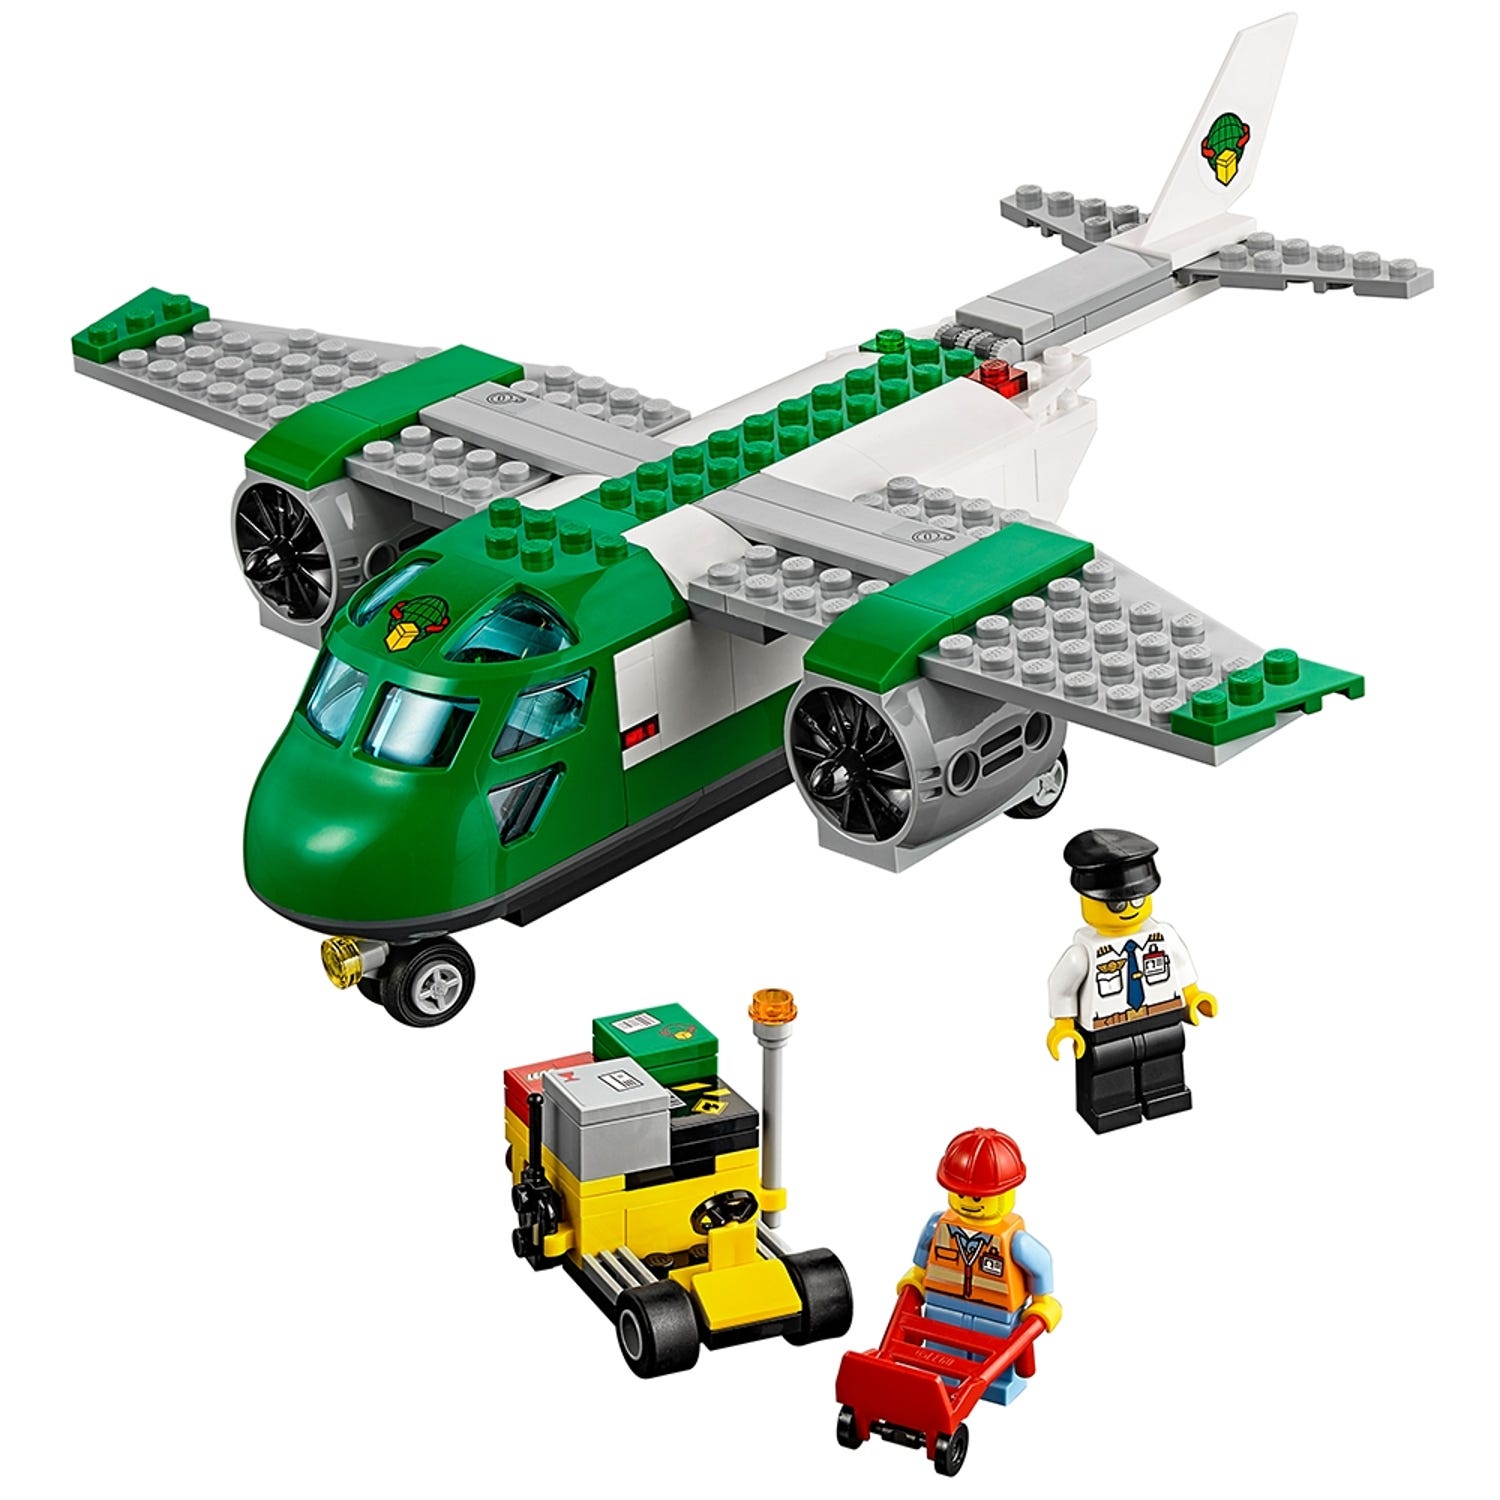 Airport Cargo Plane 60101 | City | Buy online at the Official LEGOÂ® Shop GB